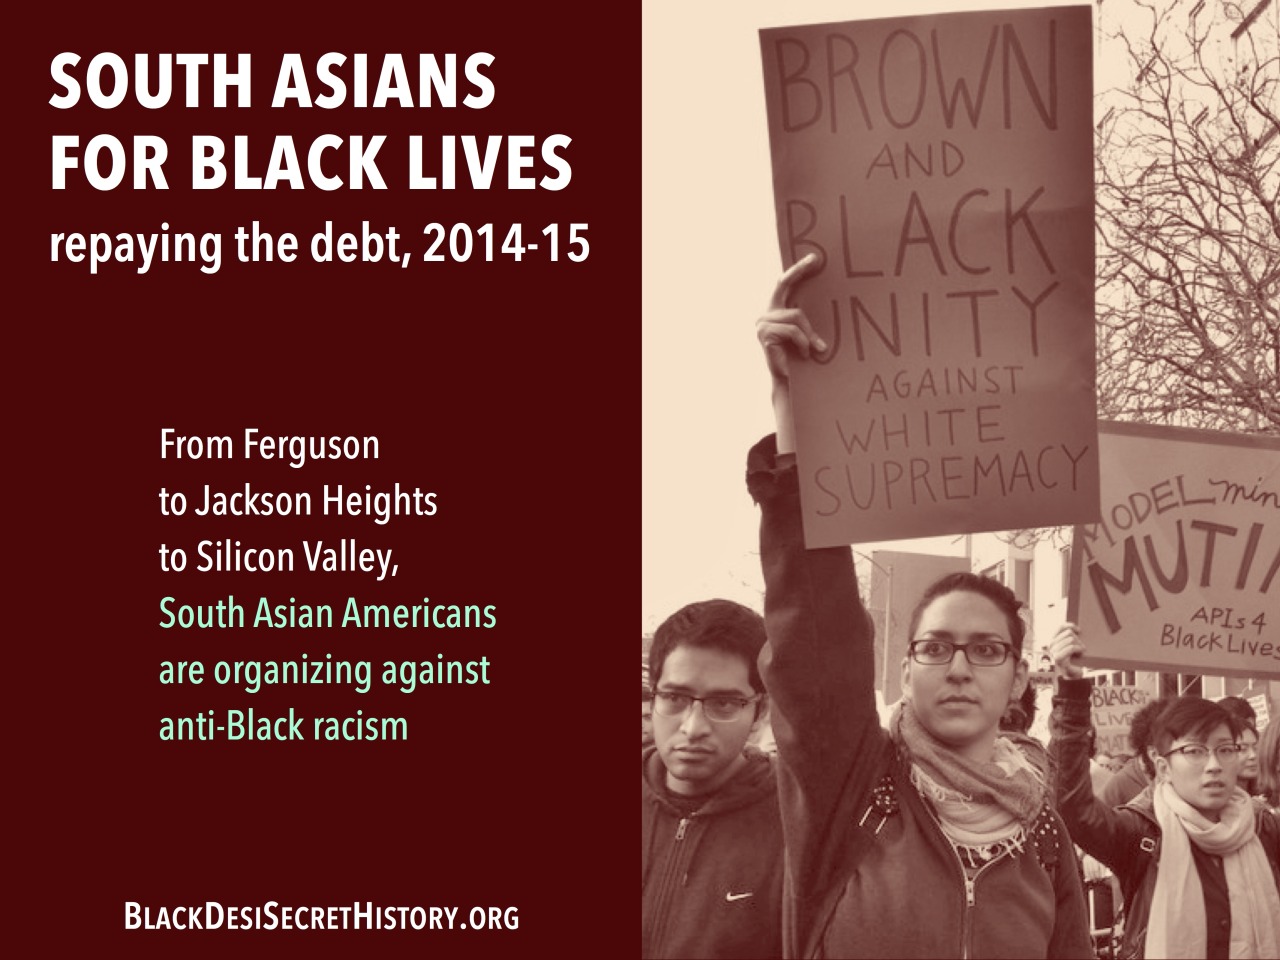 SOUTH ASIANS FOR BLACK LIVES, repaying the debt, 2014-15: From Ferguson to Jackson Heights to Silicon Valley, South Asian Americans are organizing against anti-Black racism.